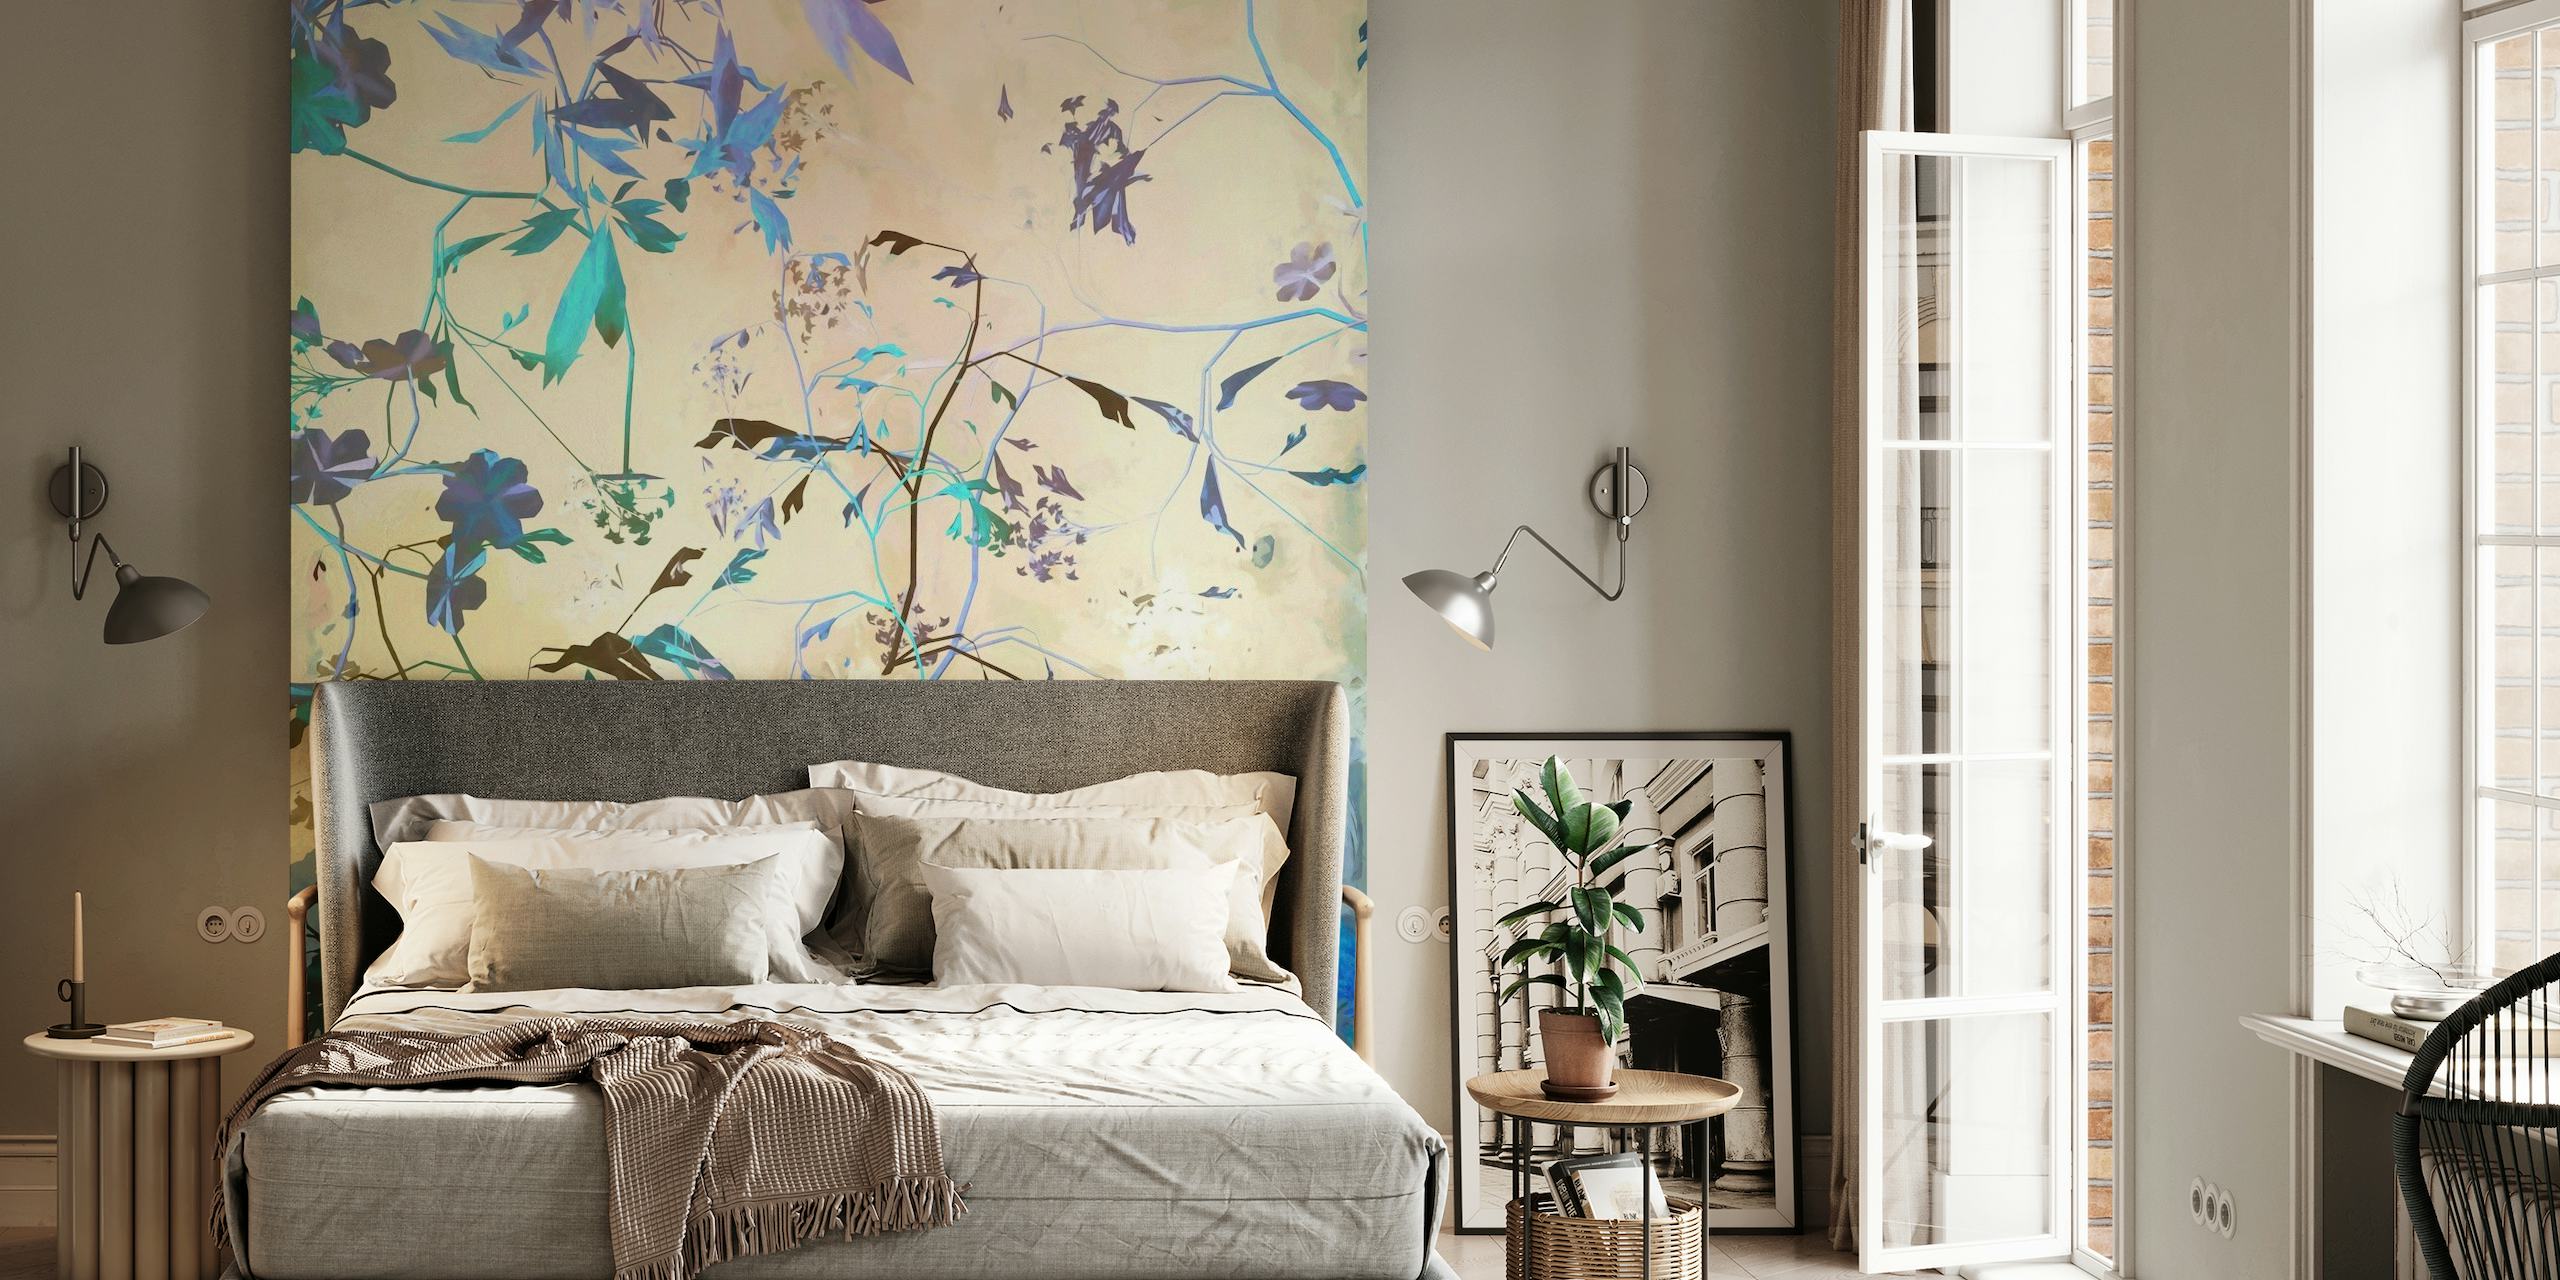 Leaves and Flowers 4 wall mural with blue and lilac botanical design